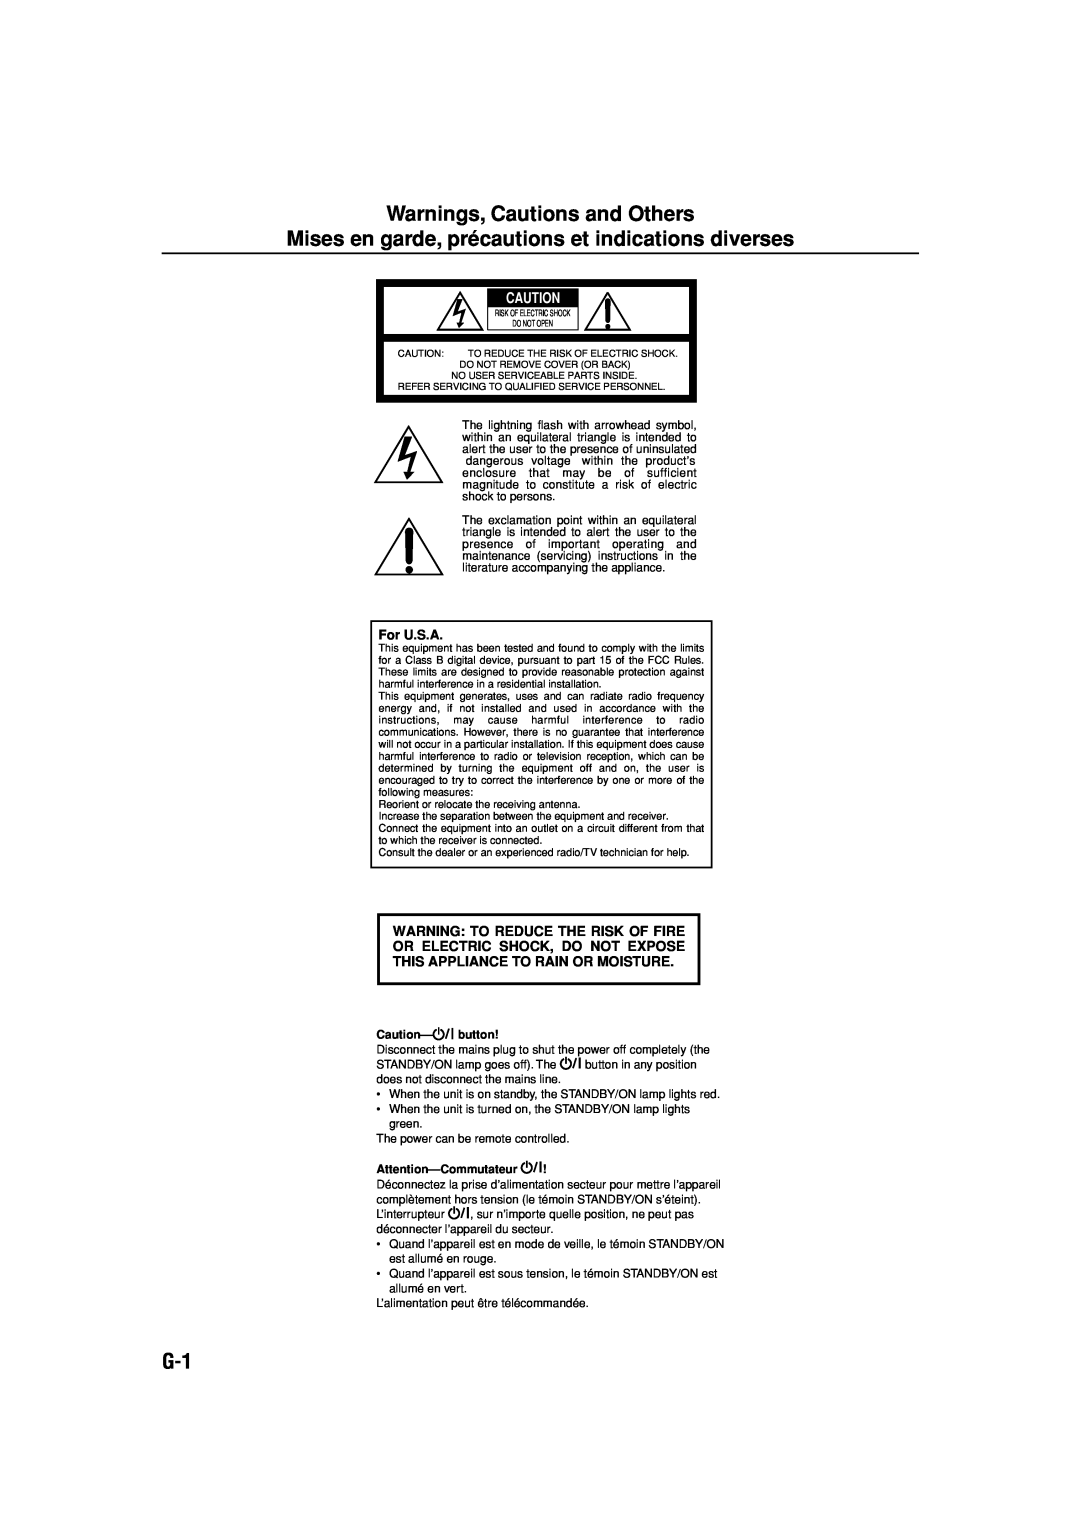 JVC CA-FSB70 manual Warnings, Cautions and Others, For U.S.A, Warning To Reduce The Risk Of Fire, Caution-button 